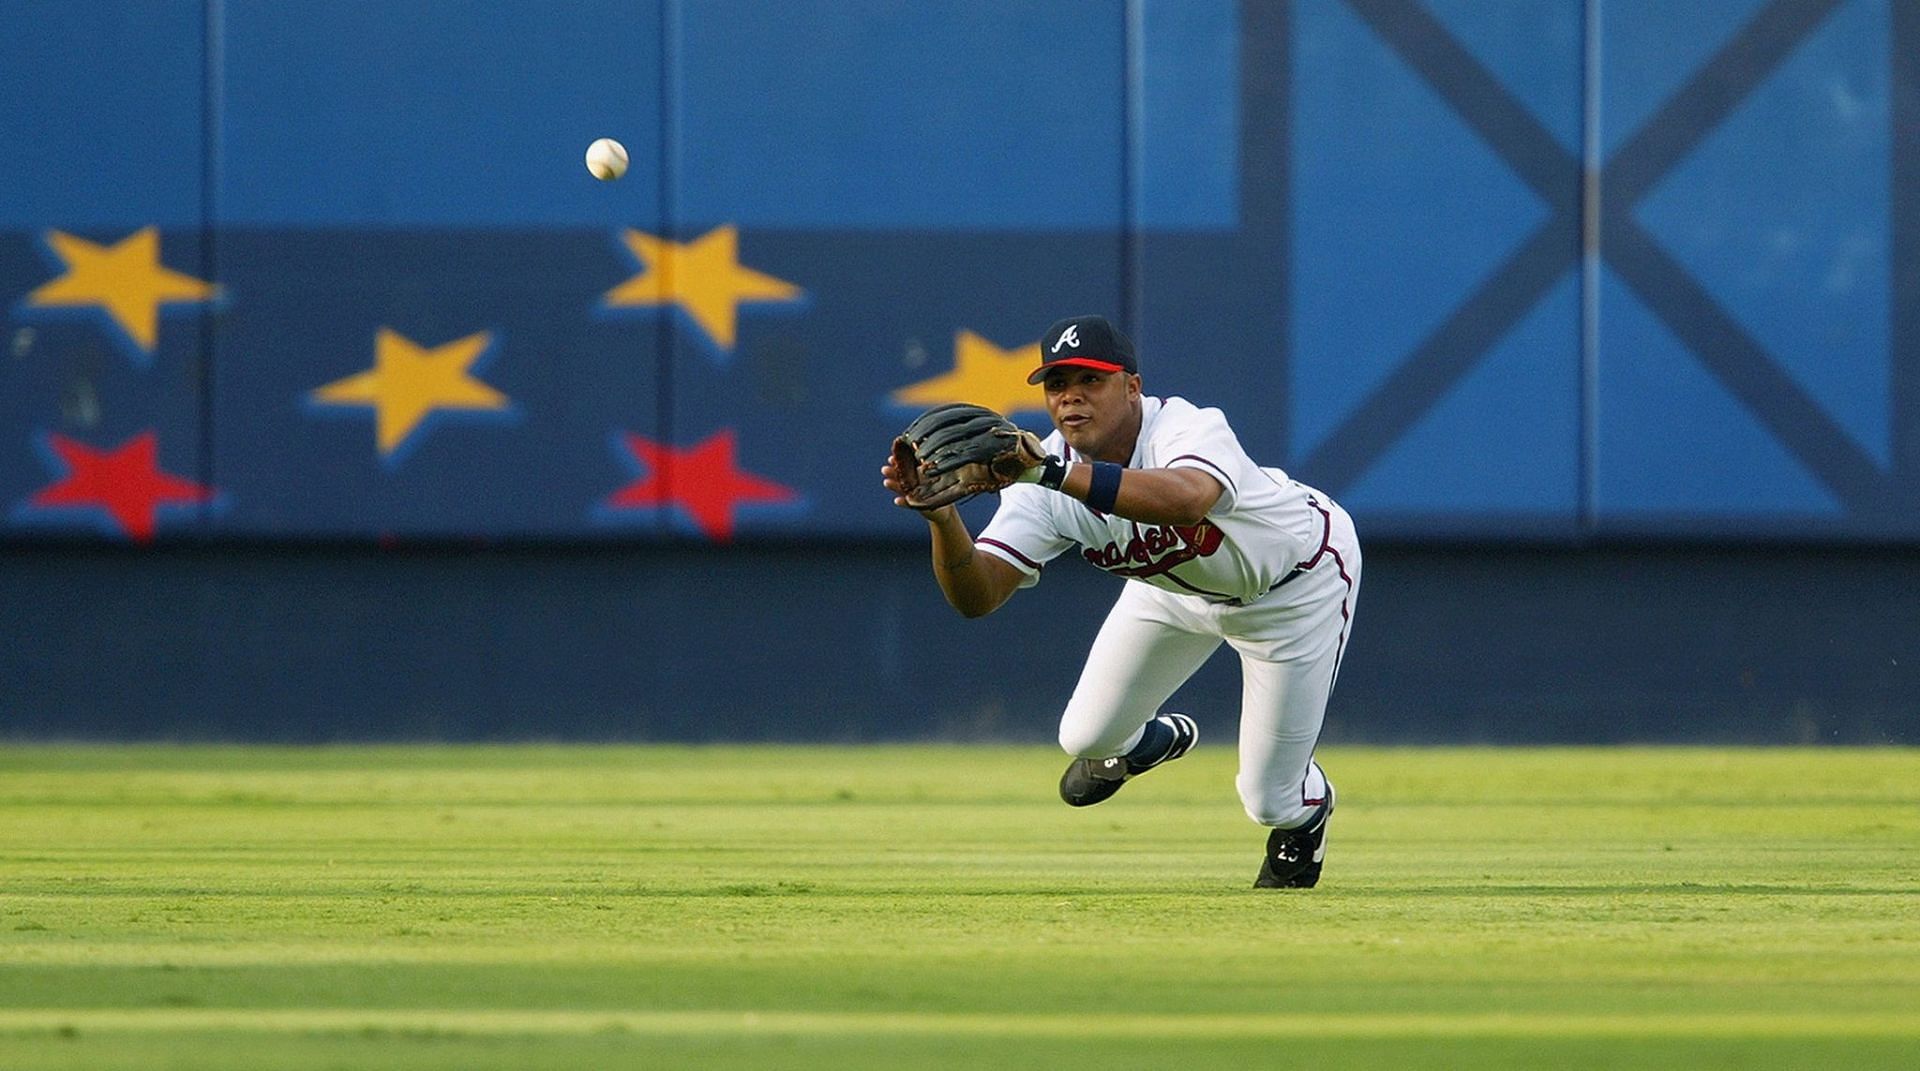 An Interview with Andruw Jones about life after baseball and